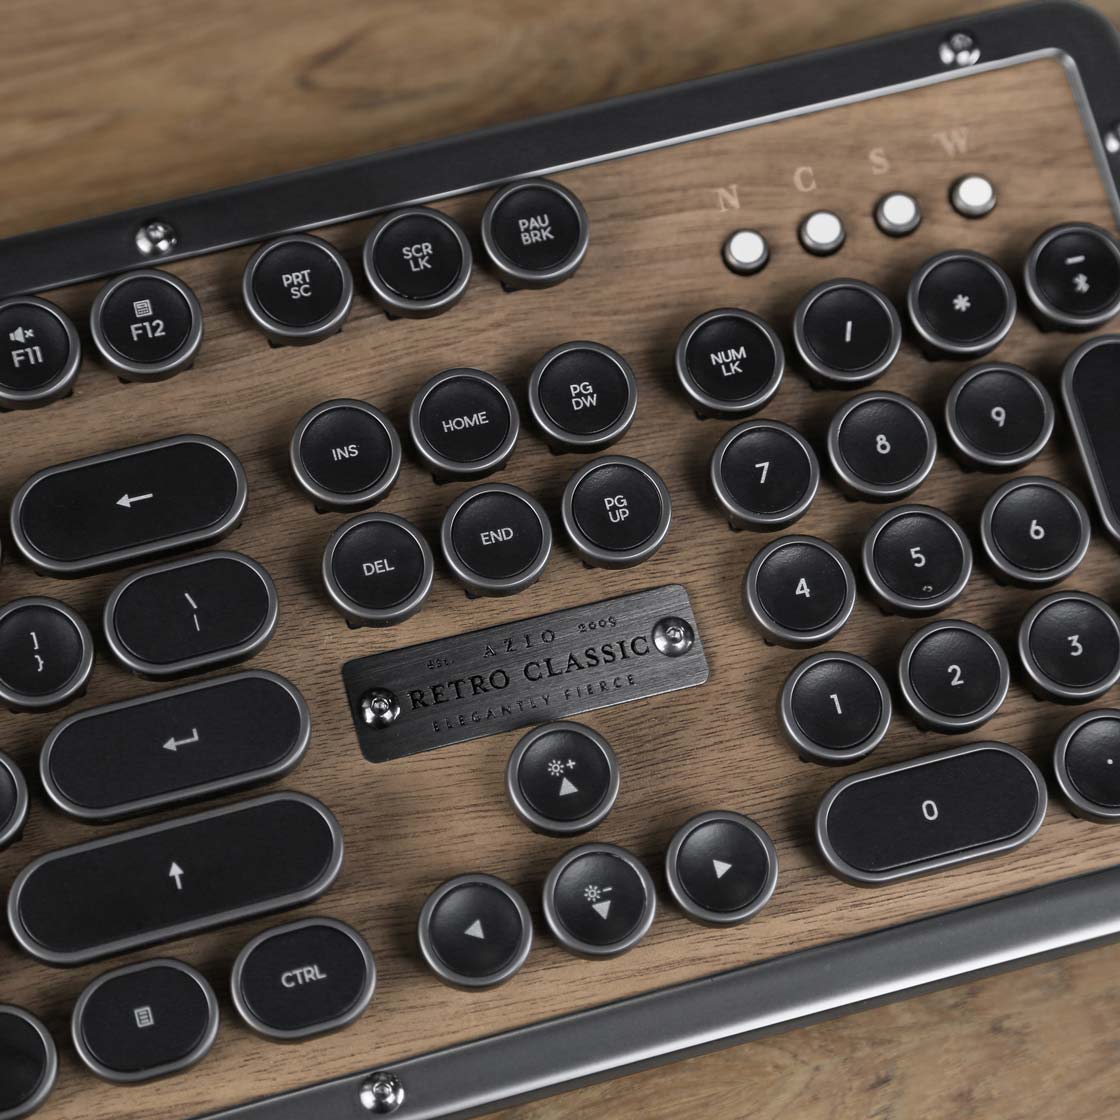 Old News Club: This Classic Retro Wooden Keyboard stands out